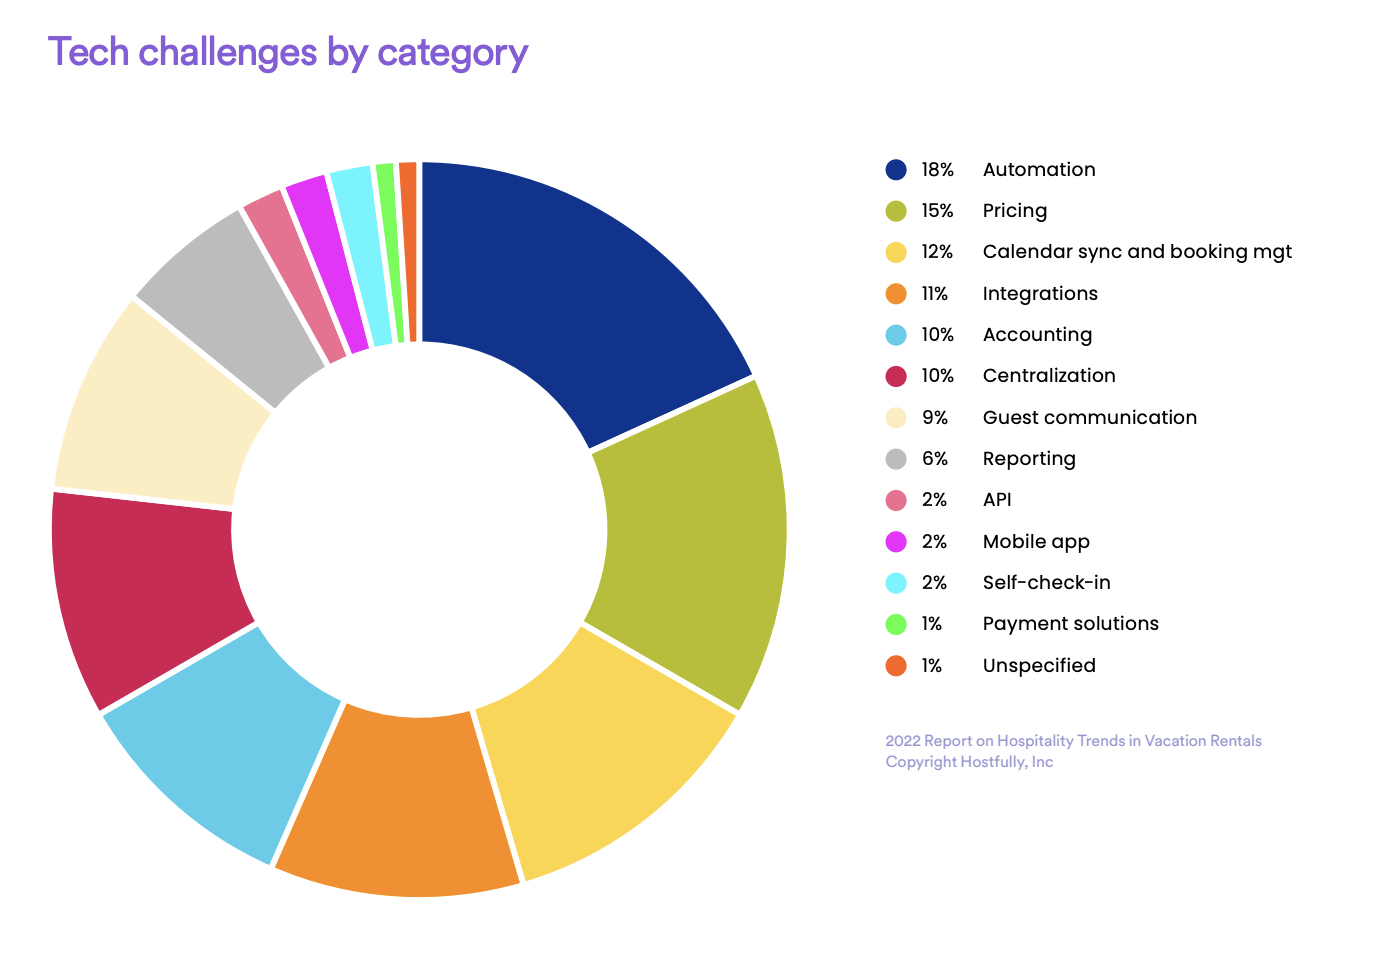 Pie chart showing tech challenges faced by vacation rental companies in 2022